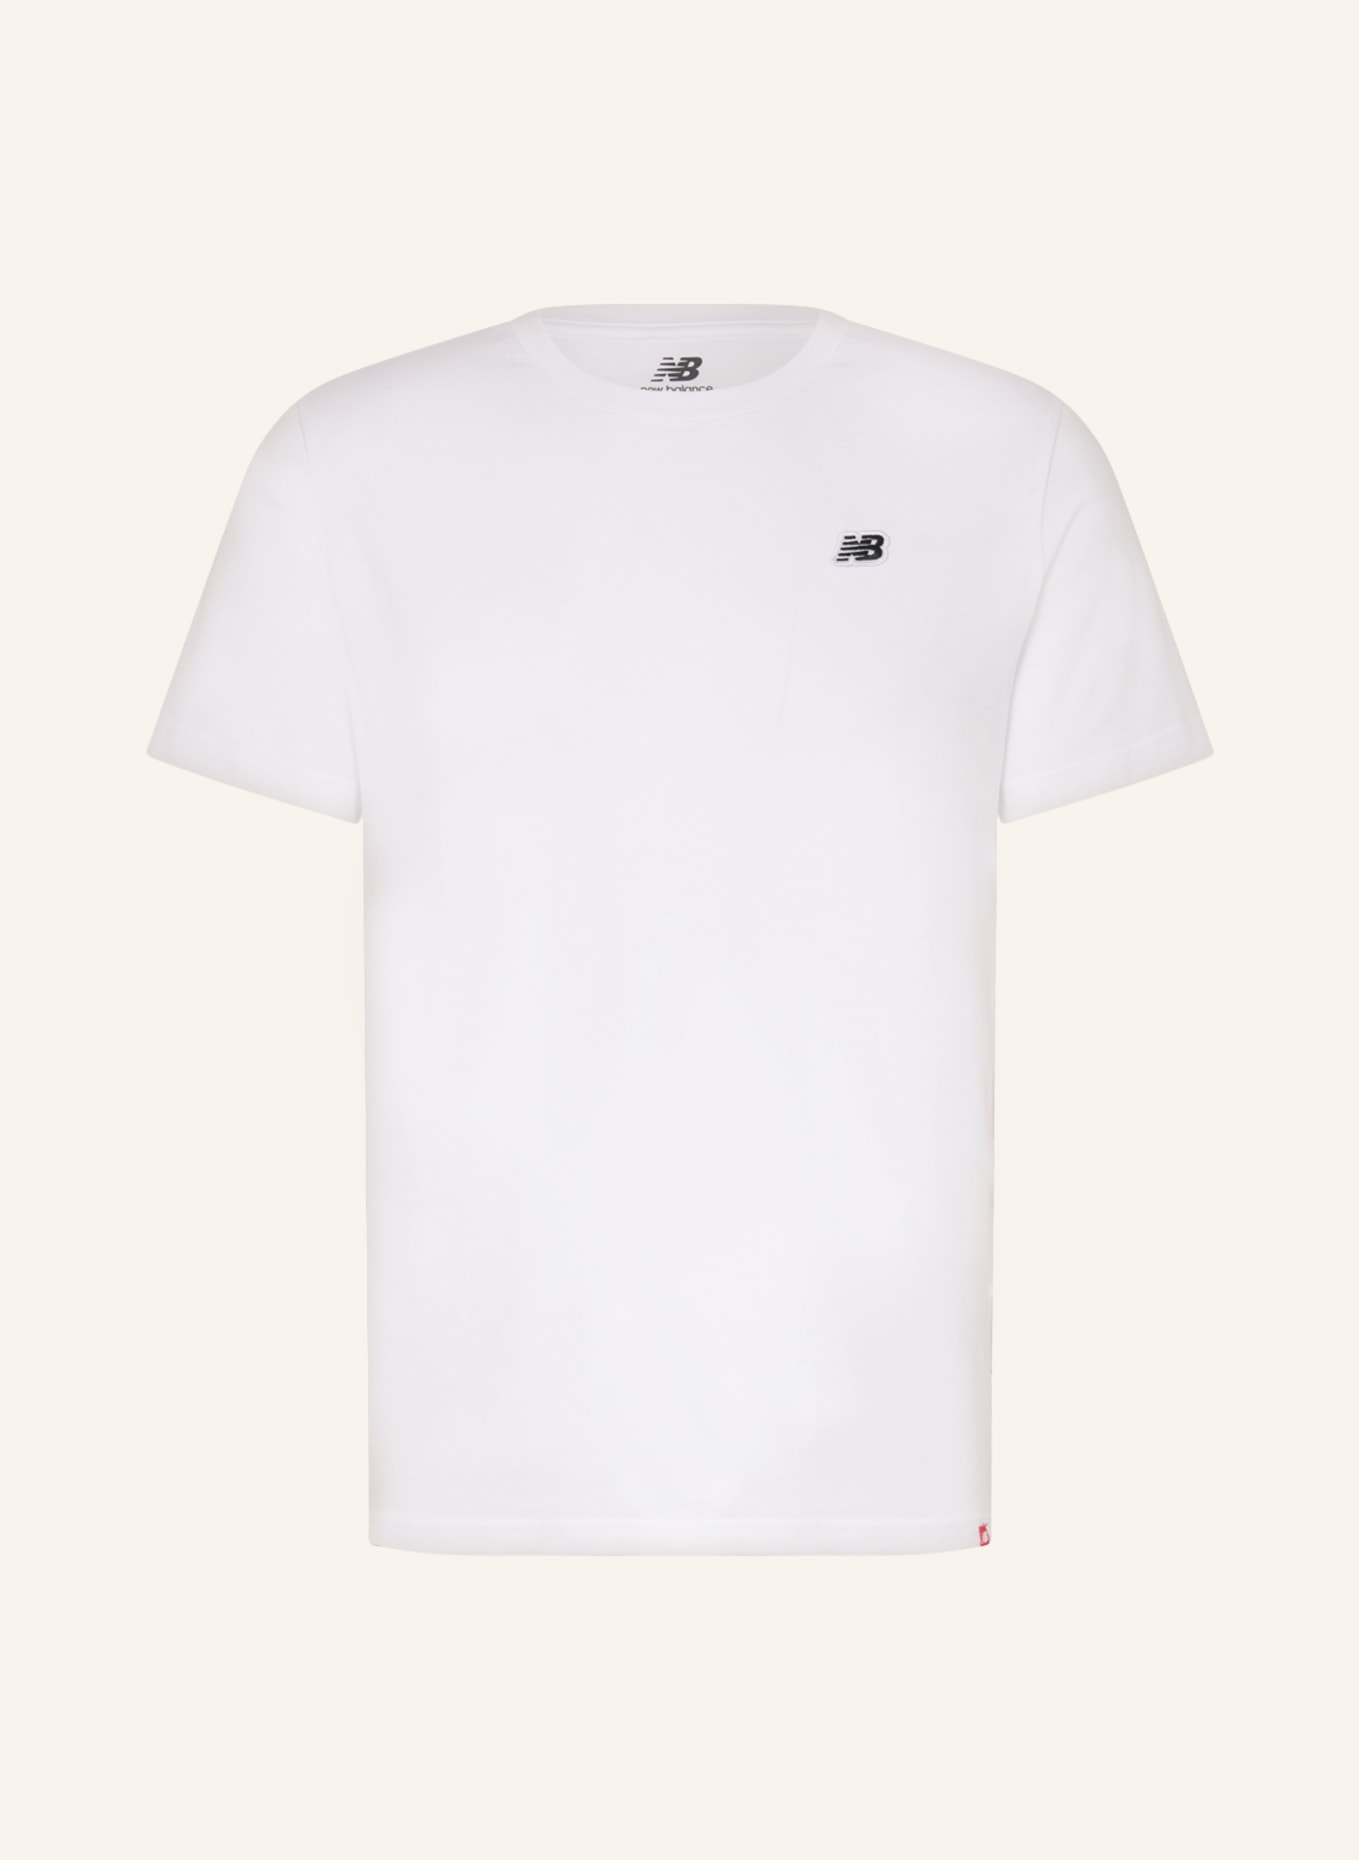 new balance T-shirt NB in SMALL white